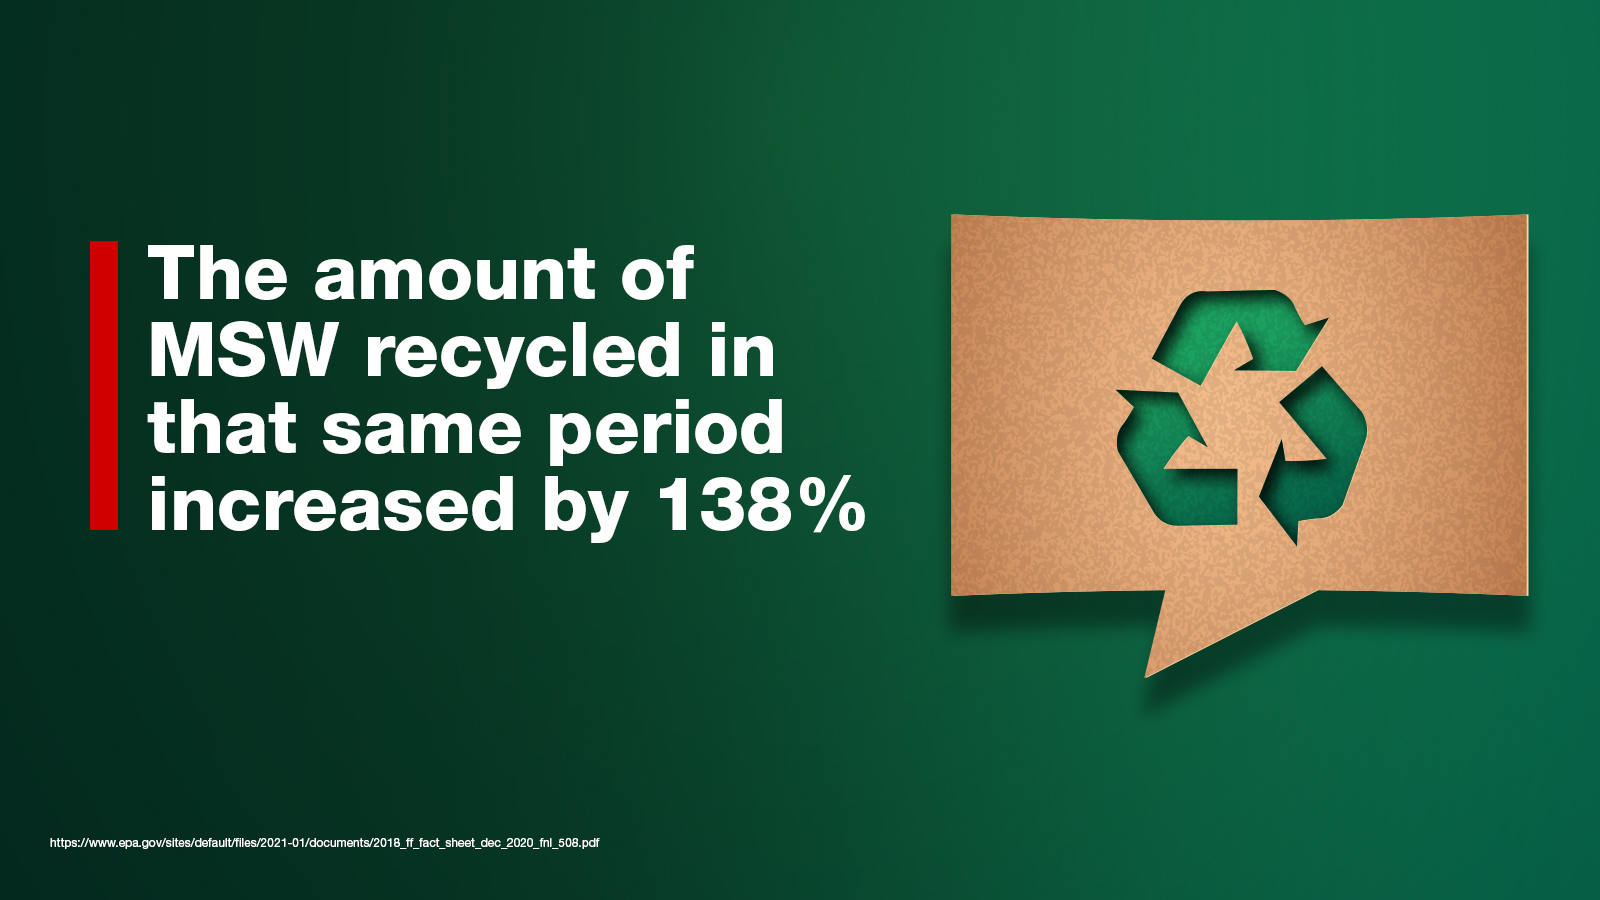 In the same period, the amount of waste recycled was 138%